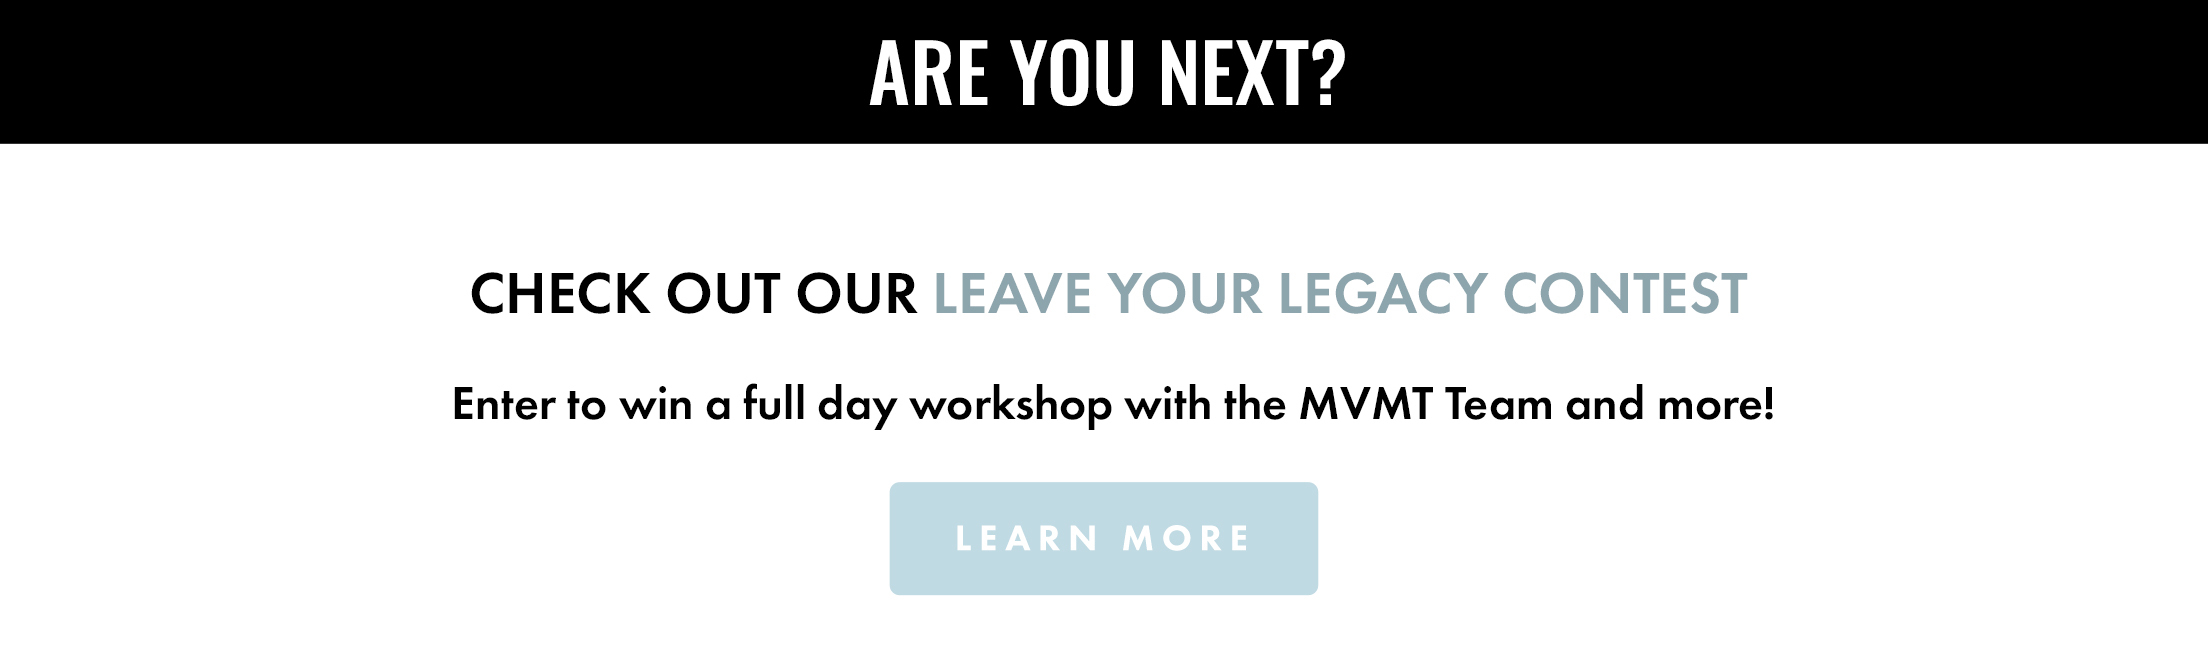 Are you next? Check out our Leave Your Legacy Contest. Enter to win a full day workshop with the MVMT Team and more! Learn more.